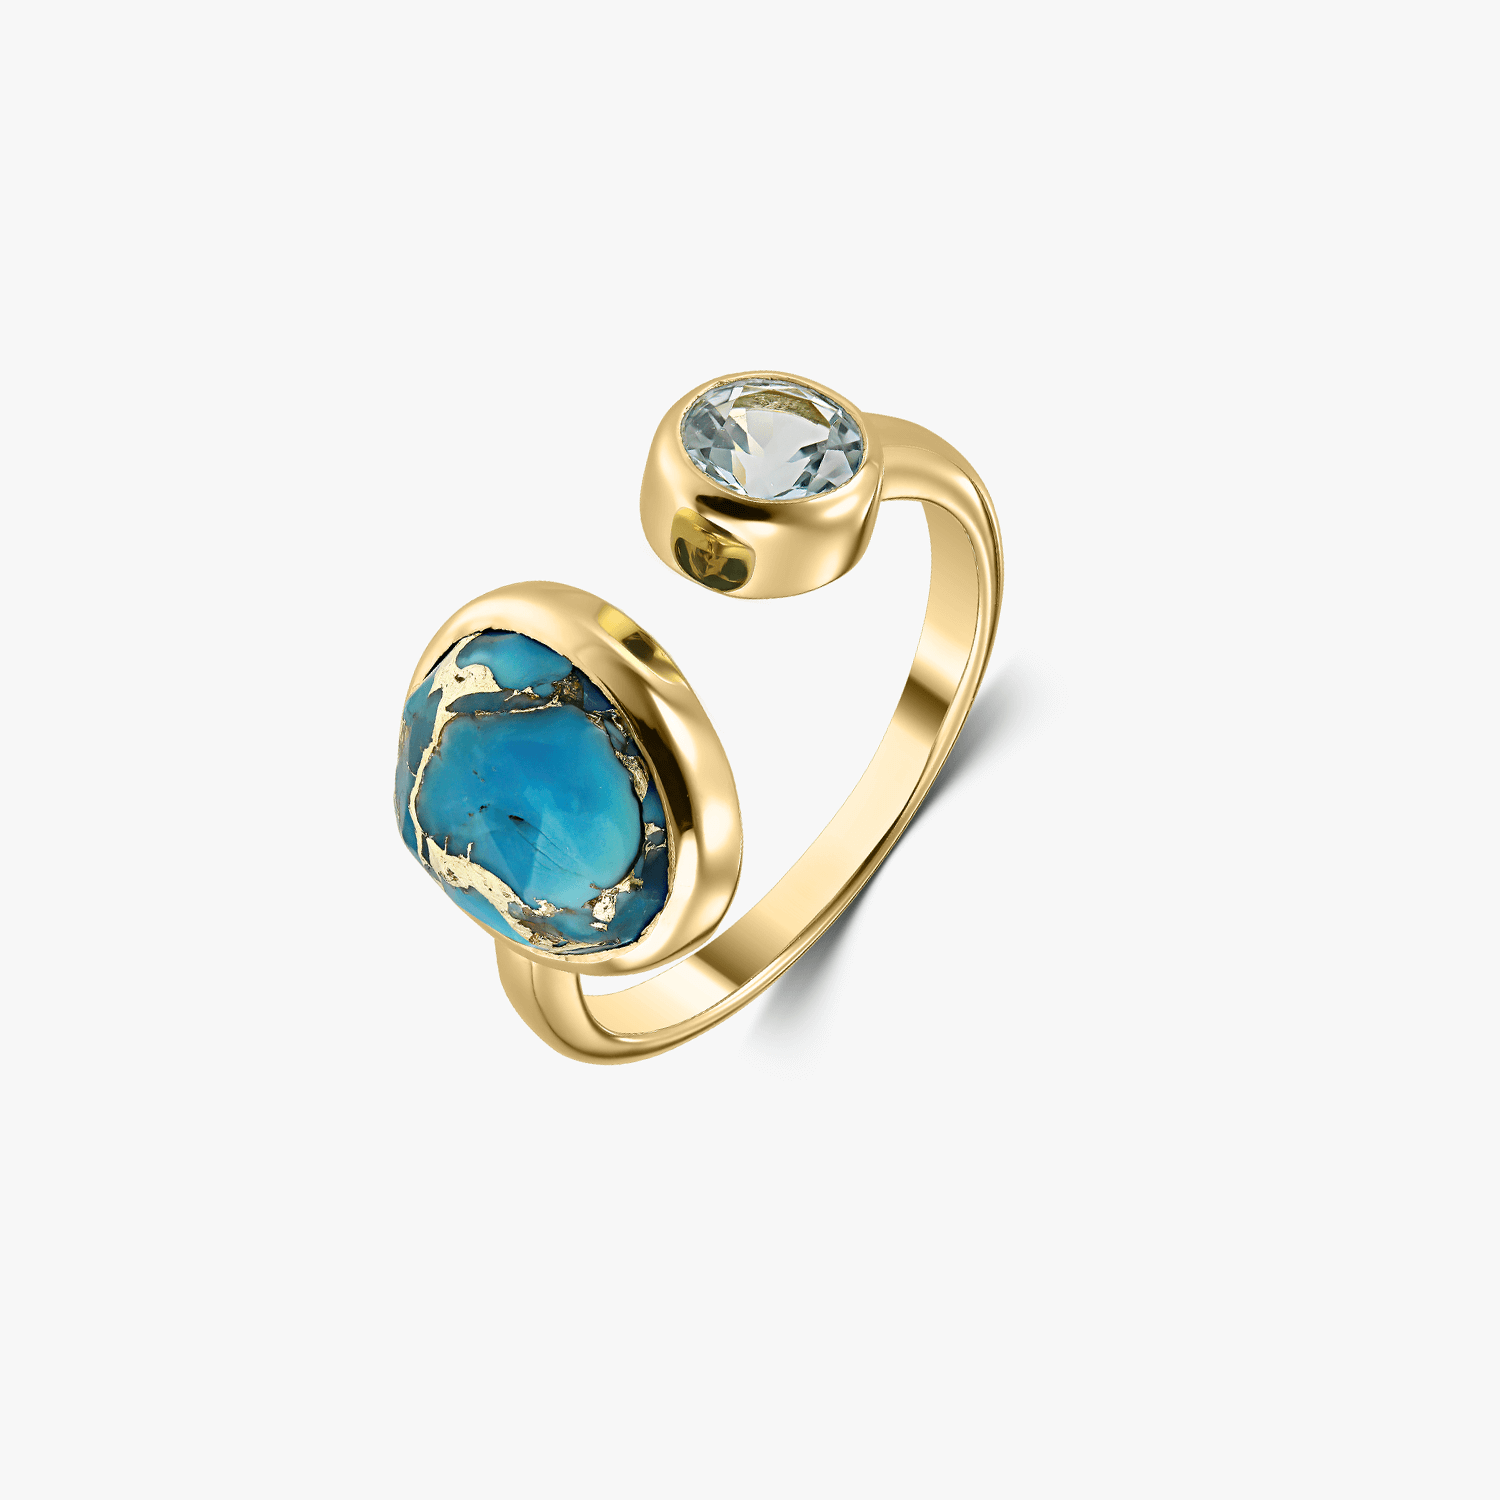 Kaylee Golden silver ring – Turquoise Blue Copper